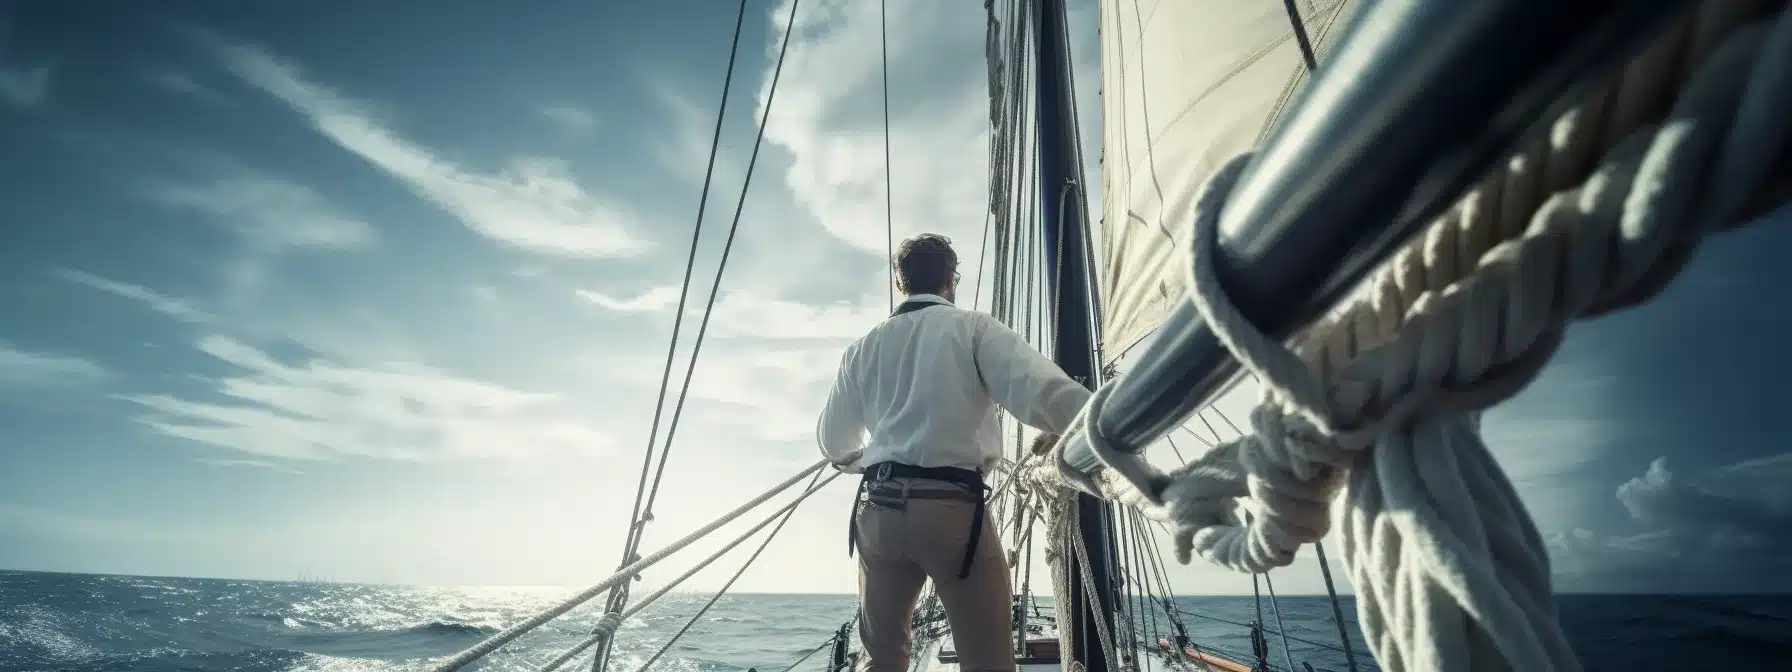 A Captain Adjusting The Sails Of A Ship In A Vast Ocean, Keeping A Vigilant Eye On The Compass And The Changing Wind Direction.